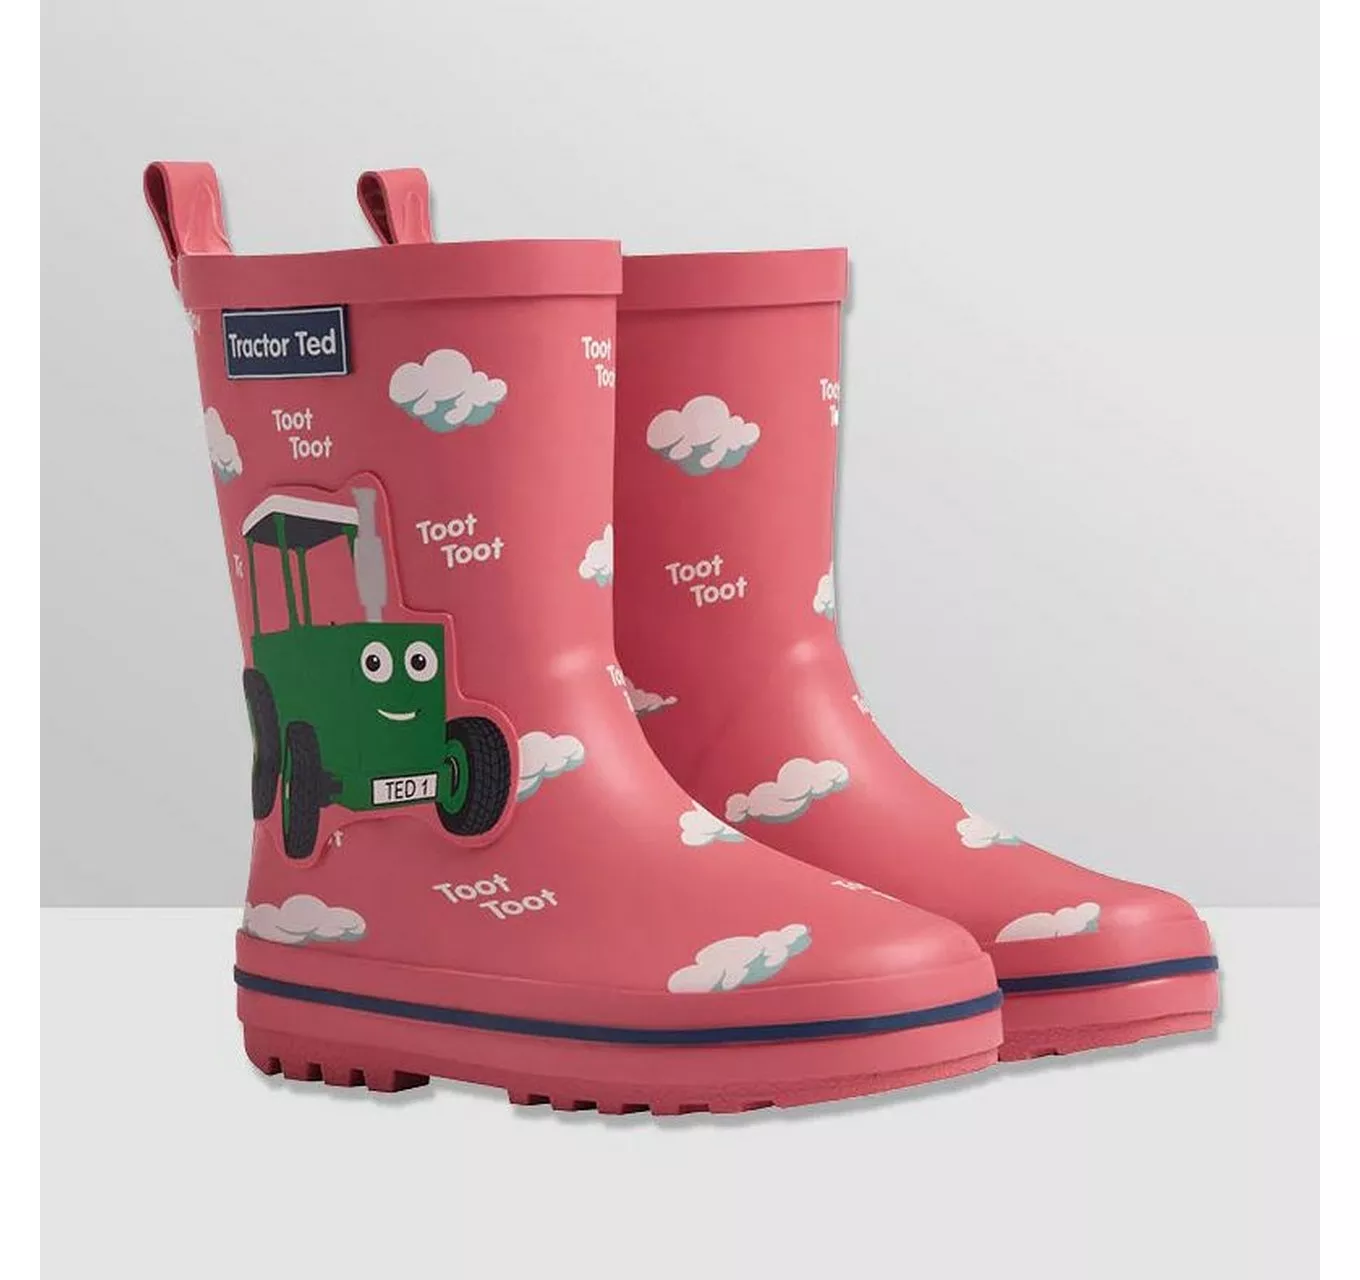 Tractor Ted Toot! Wellies 6